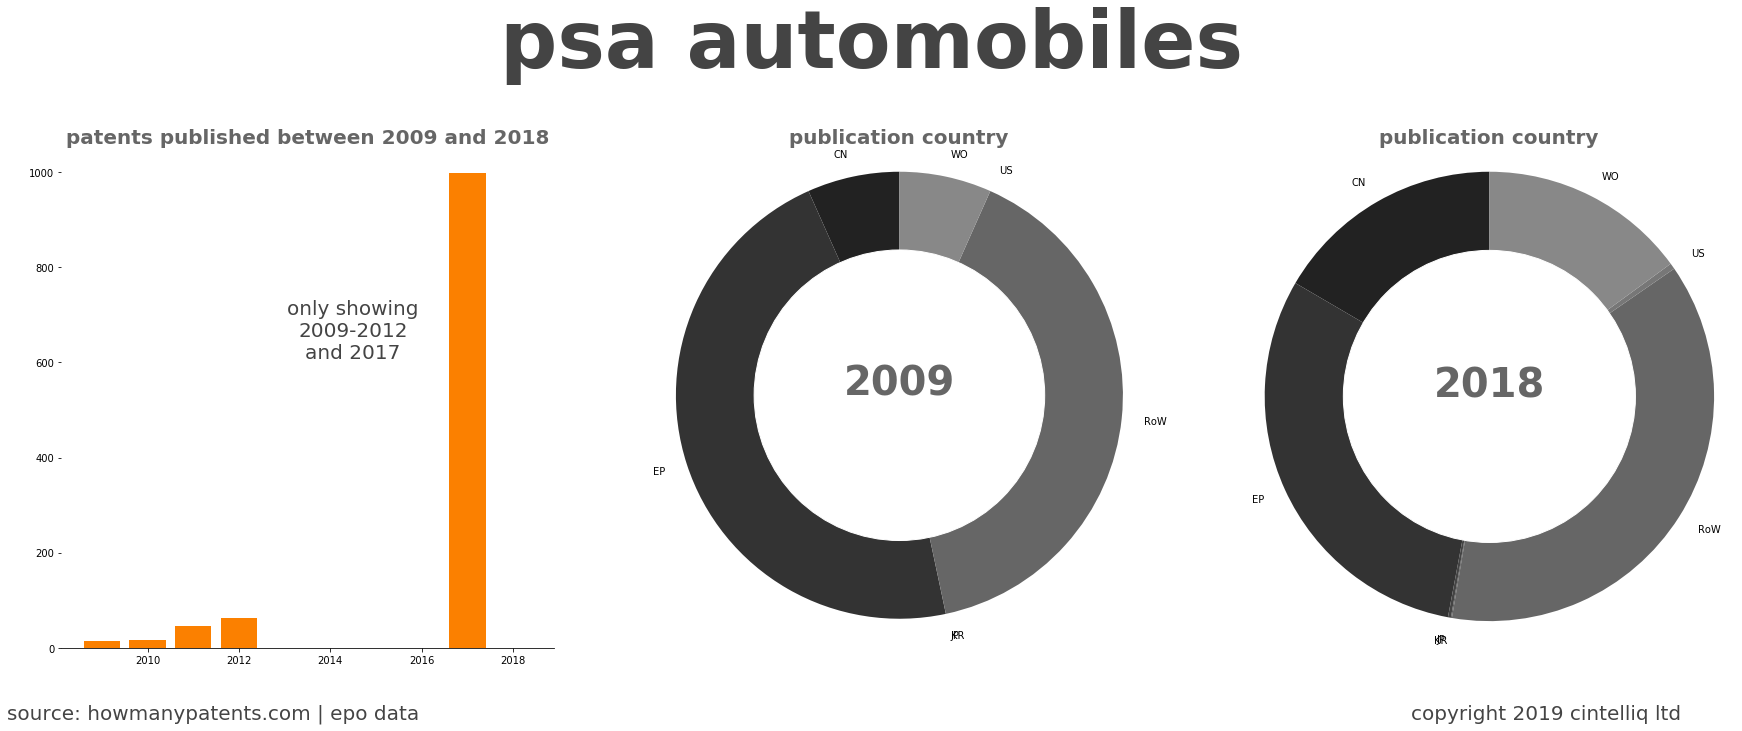 summary of patents for Psa Automobiles